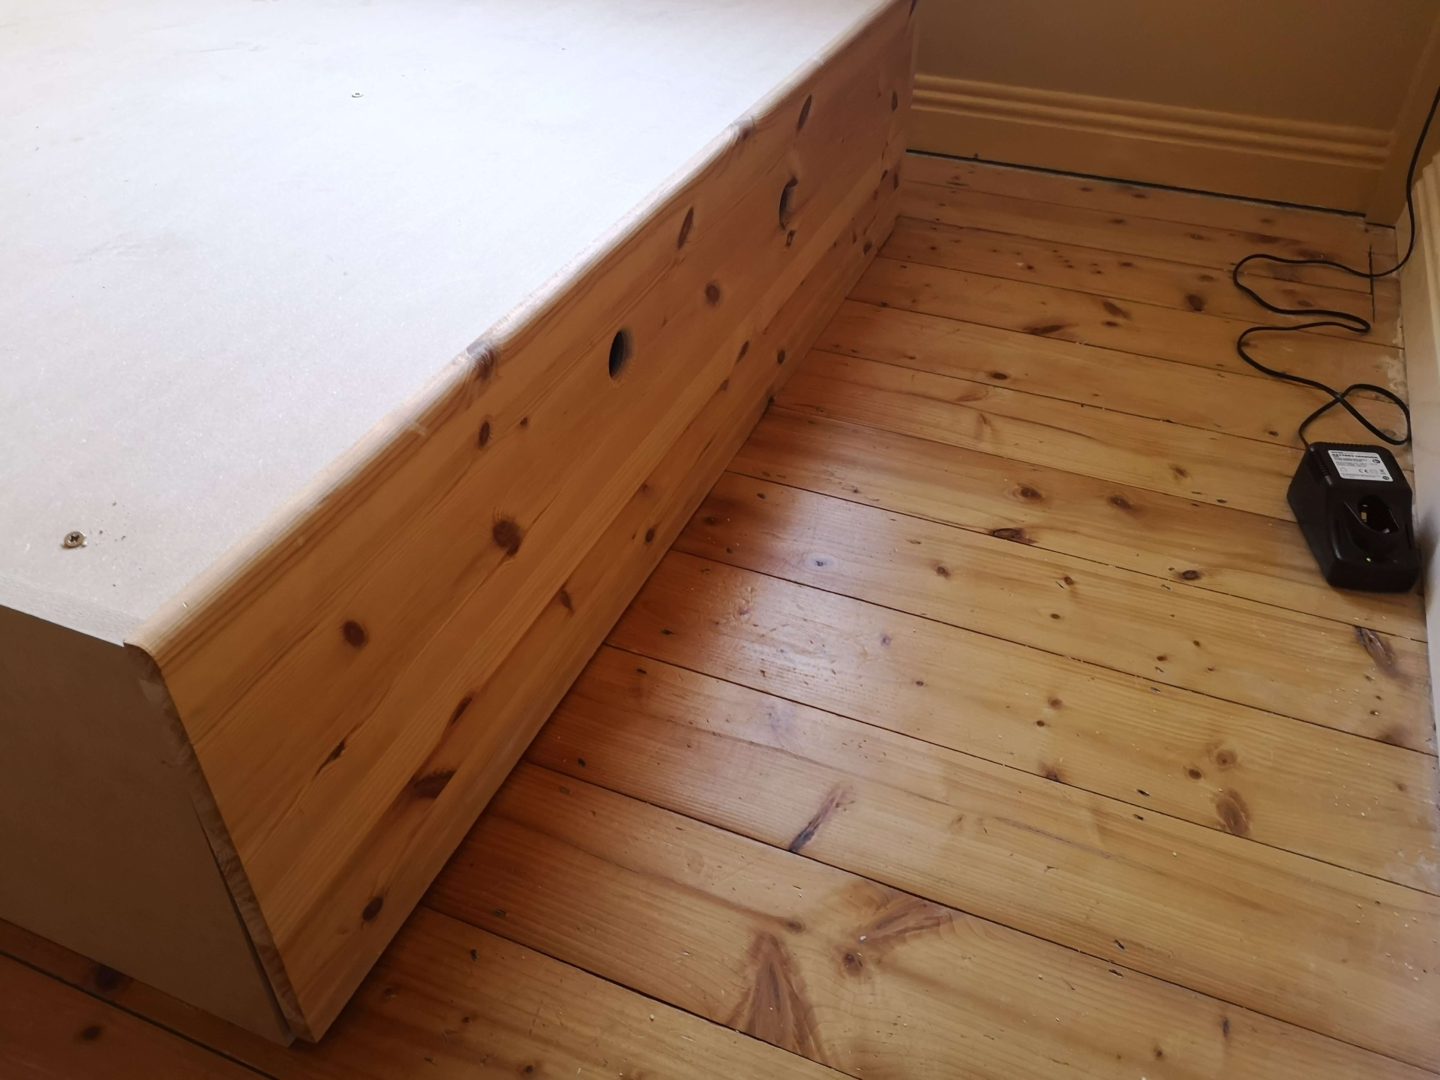 Two holes in the front panel of the bed, that can be used as handles.